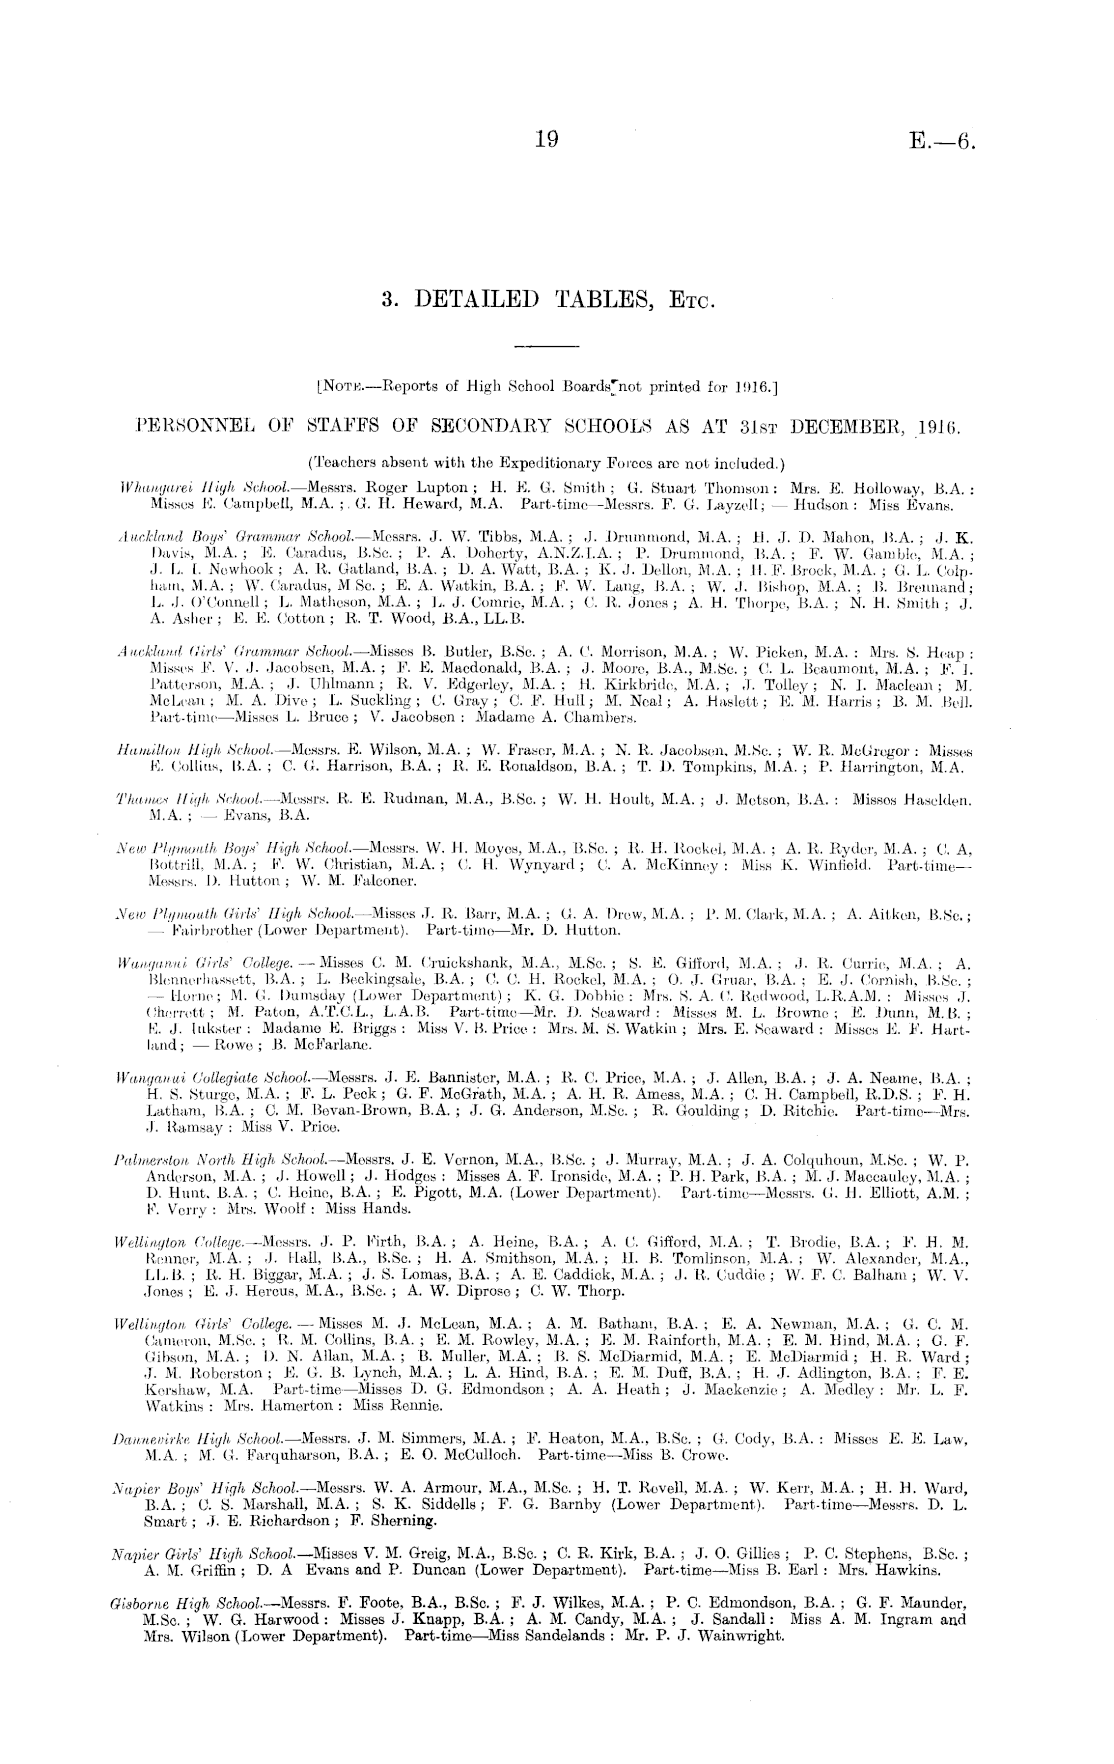 Papers Past Parliamentary Papers Appendix To The Journals Of The House Of Representatives 1917 Session I Page 19